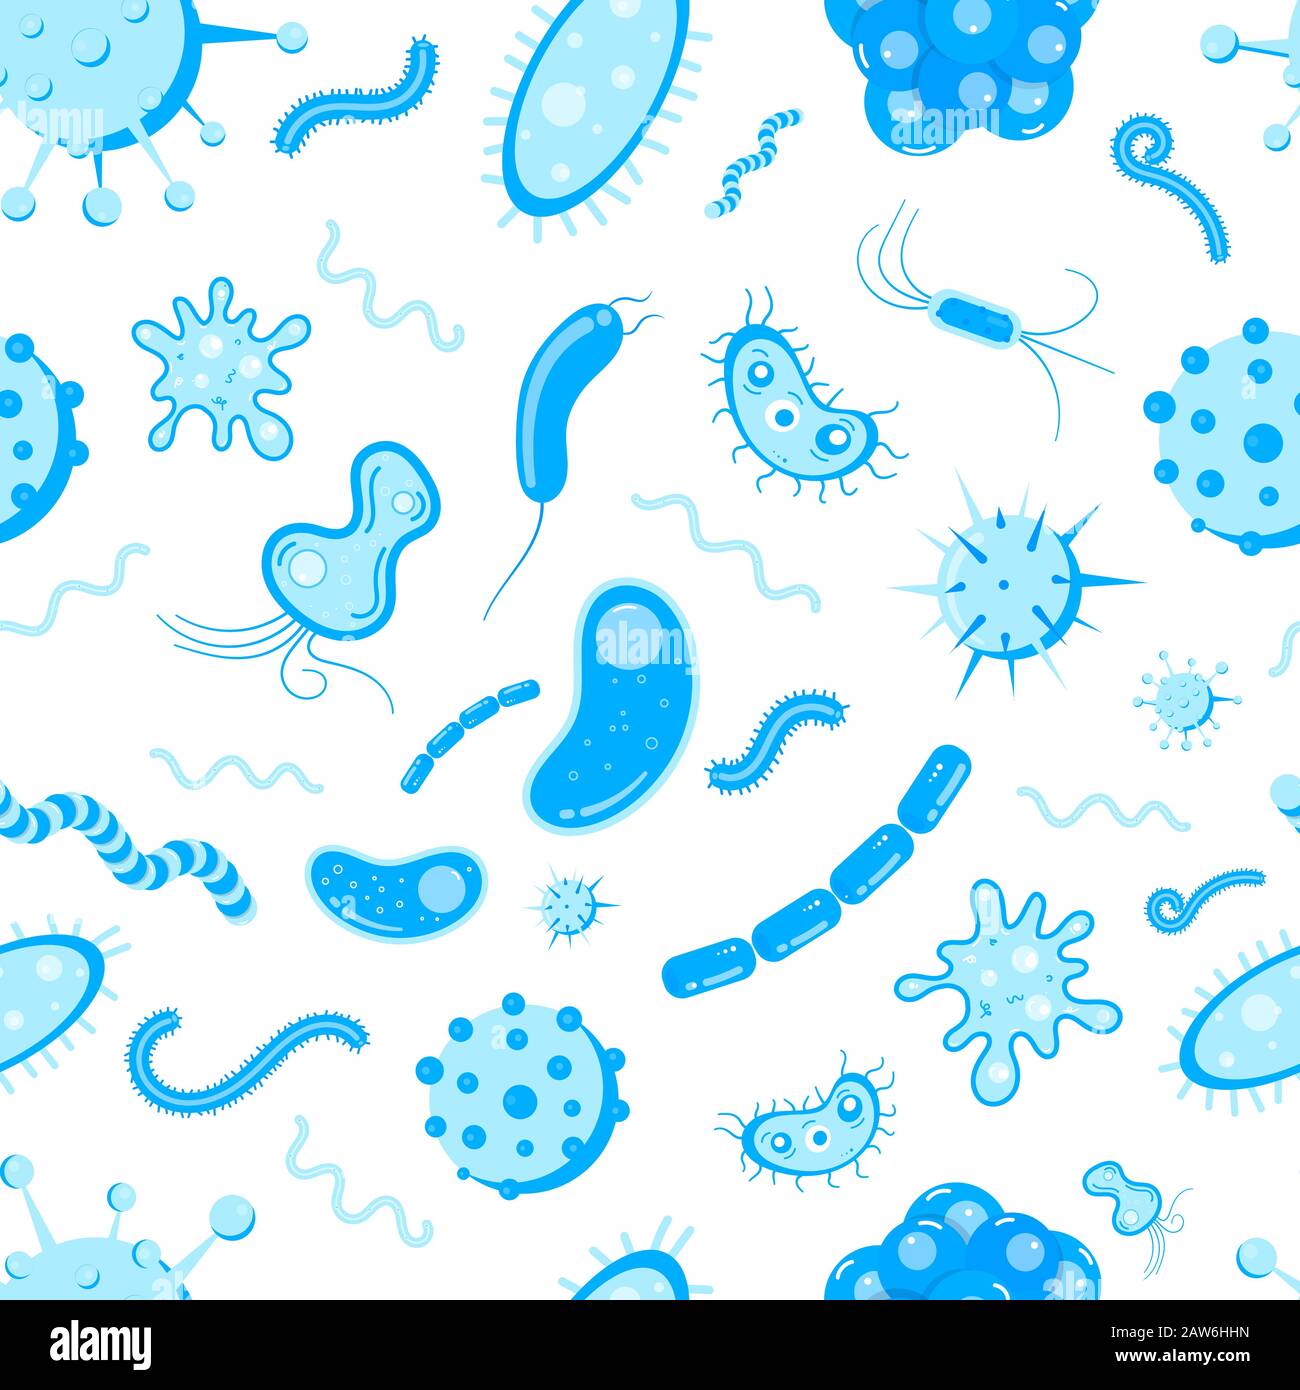 Bacterial microorganisms, germs and viruses colorful seamless pattern. Viruses, infections colorful, micro-organisms disease objects, cell cancer vect Stock Vector